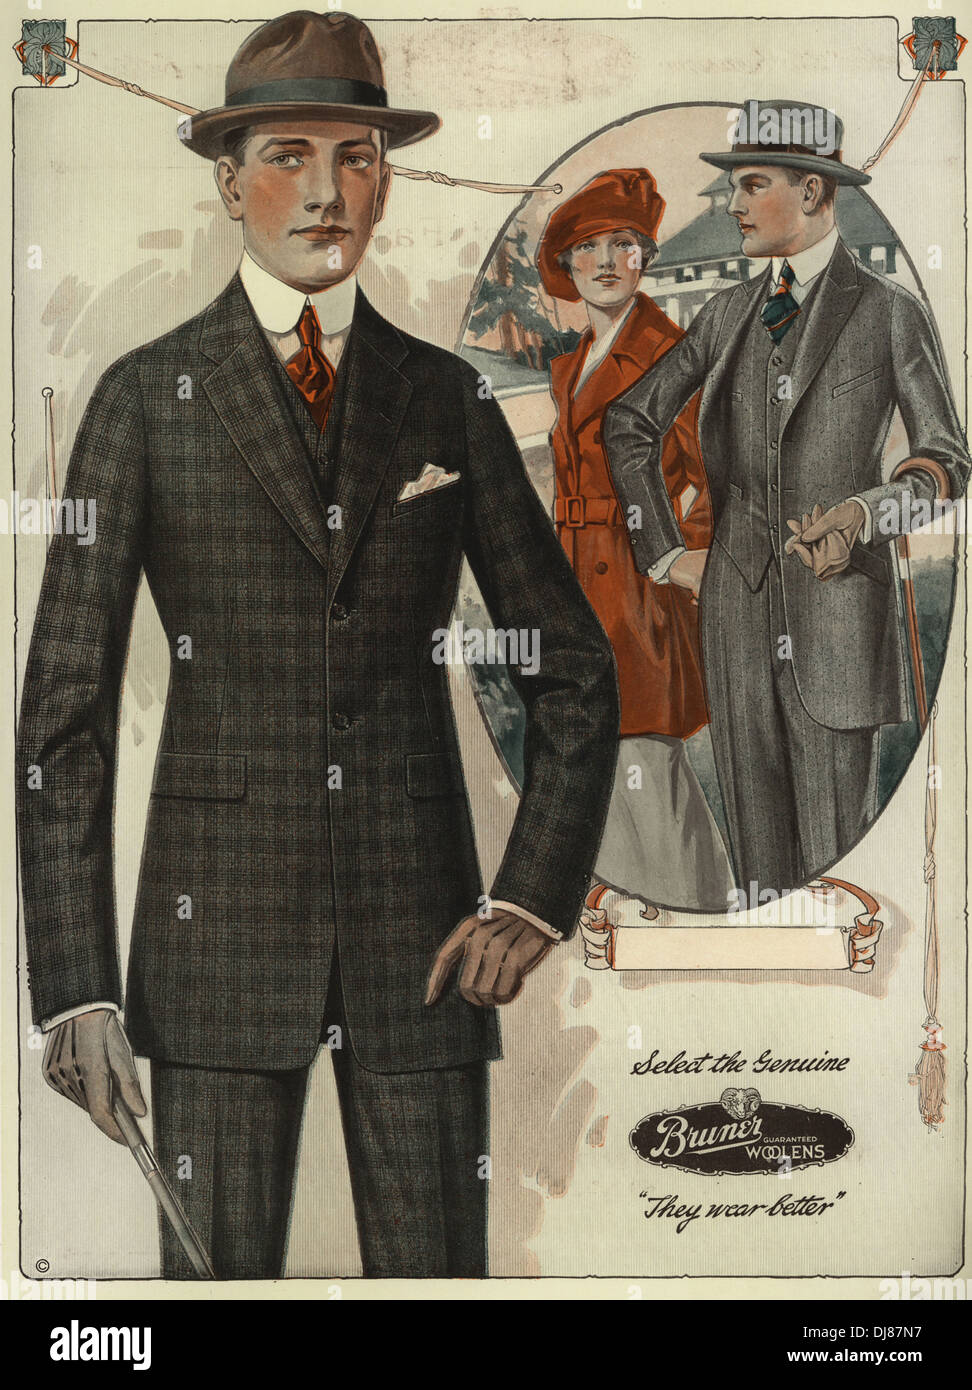 Men's conservative single-breasted suits. Chromolithograph from a catalog of male winter fashions from Bruner Woolens, 1920. Stock Photo